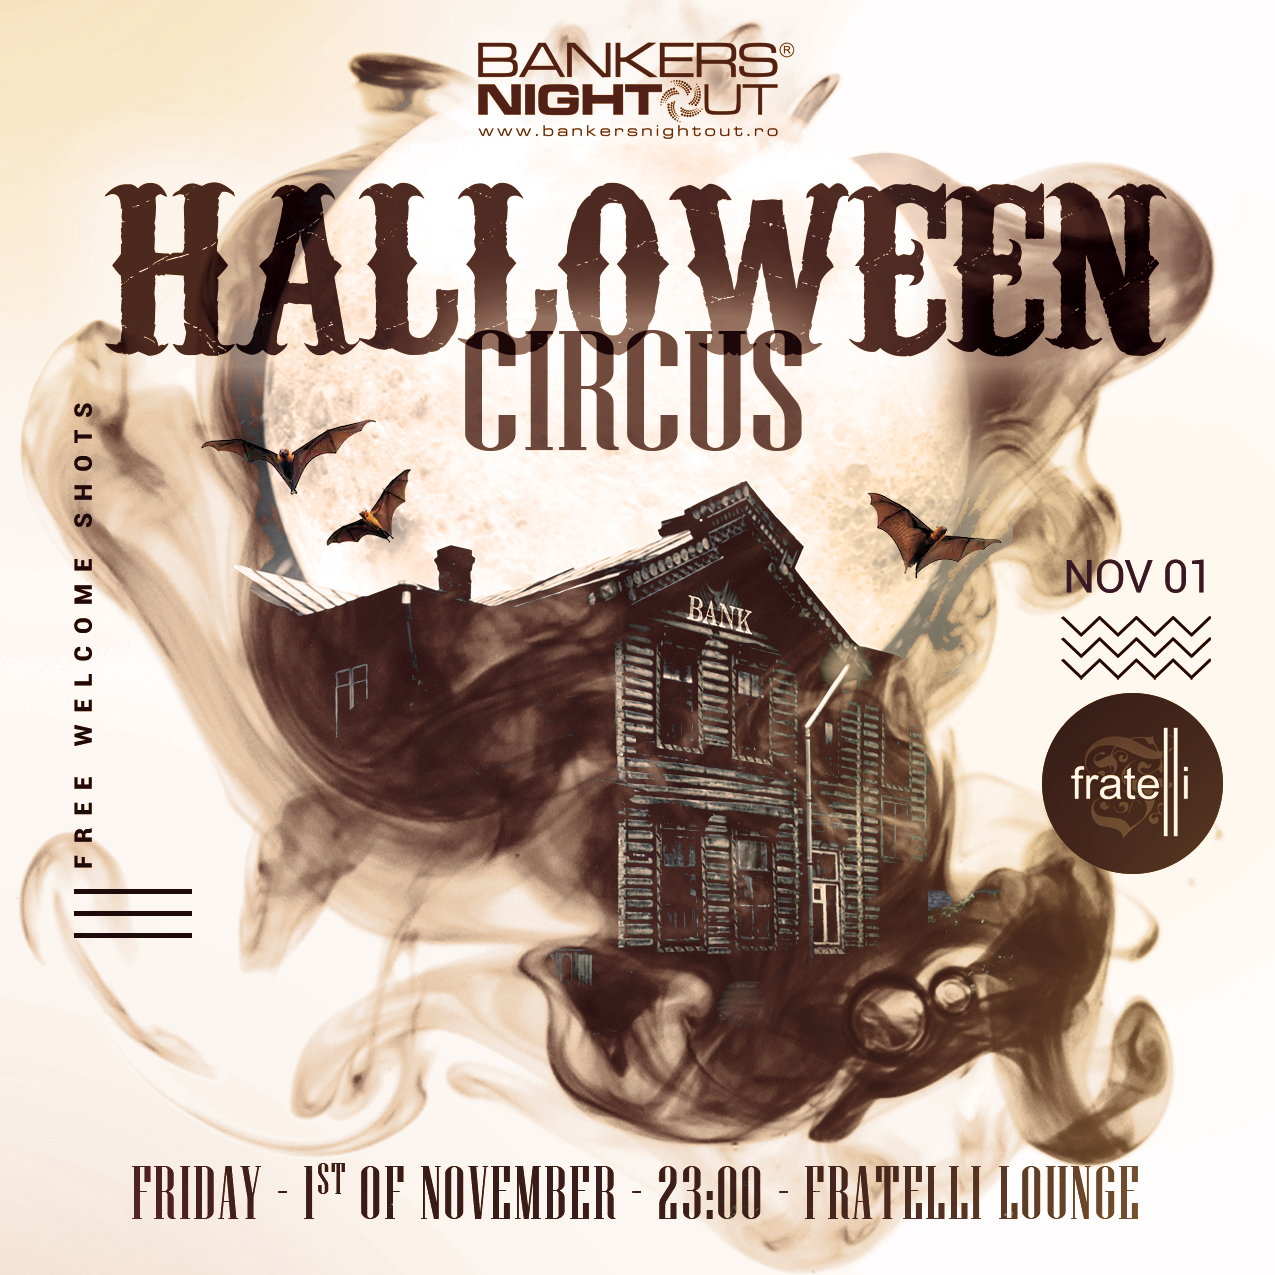 The Halloween Circus is coming soon, So grab your mask, your sword or your broom. The Bankers family will be your host, Come dressed as a king, a witch or a ghost!